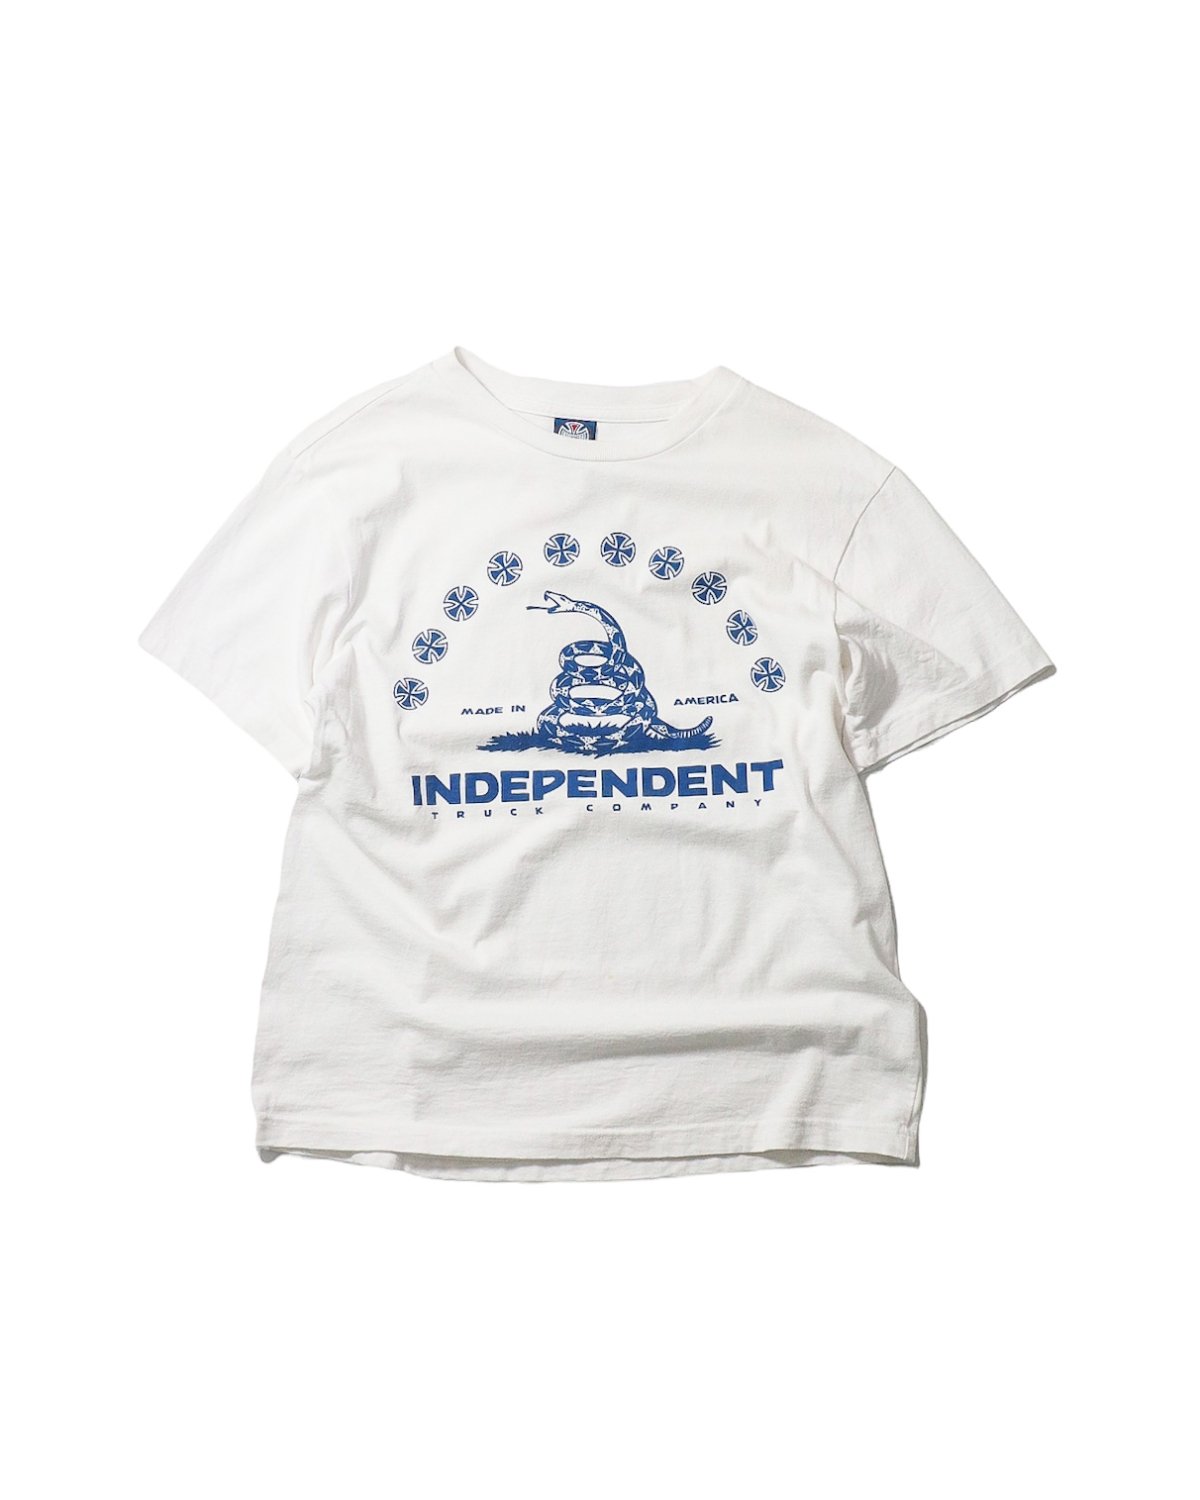 “INDEPENDENT” S/S Tee (Made in USA)